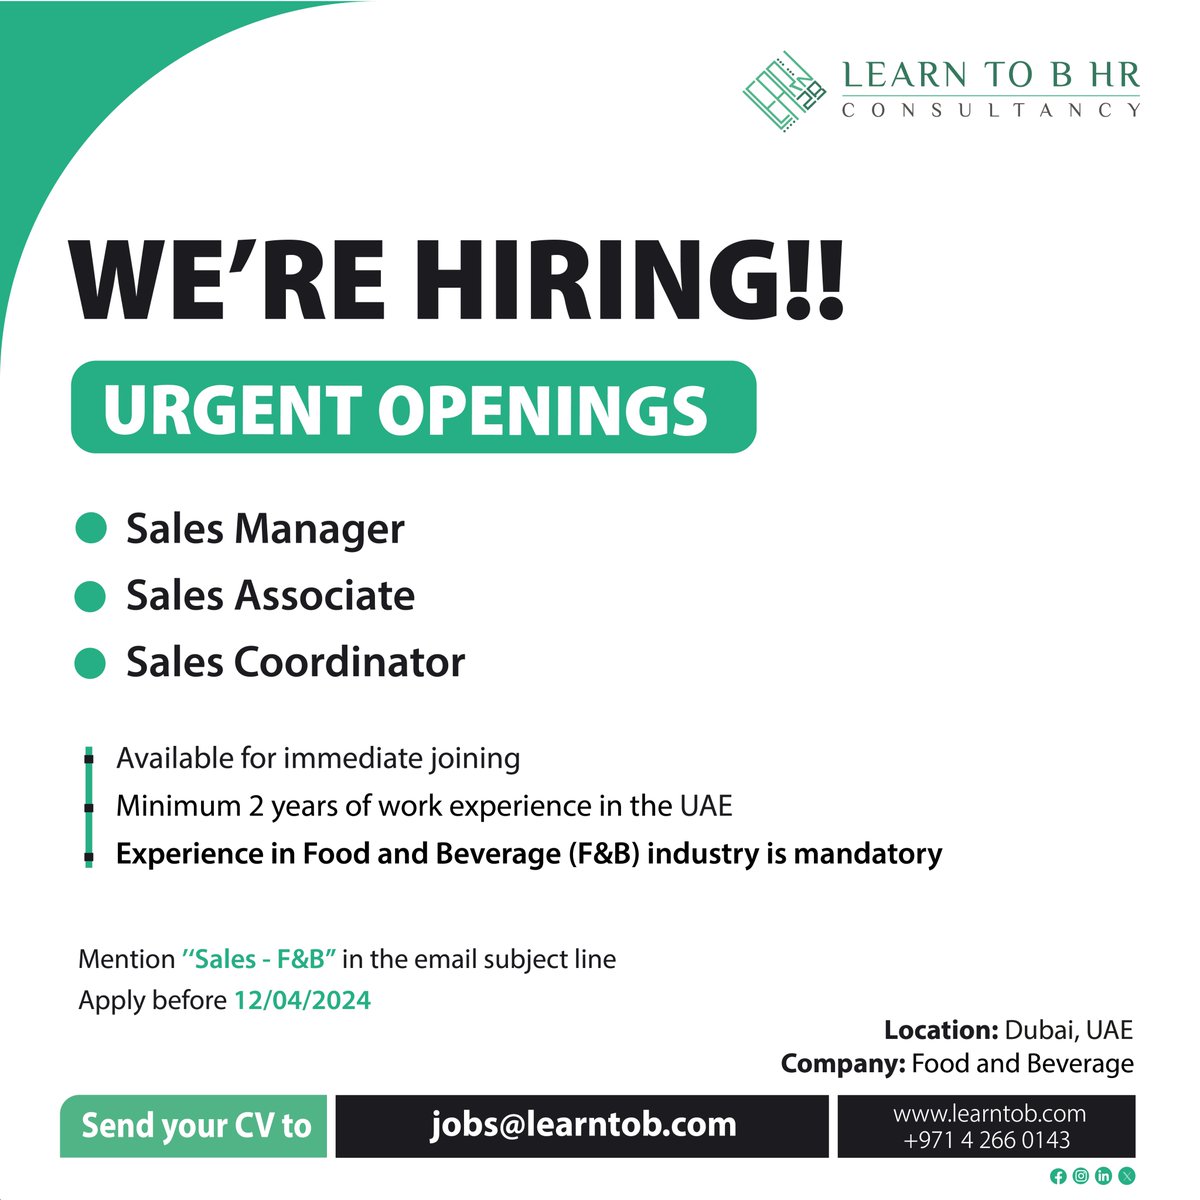 We're expanding our team and looking for dynamic individuals to fill the following roles:
🔹 Sales Manager
🔹 Sales Associate
🔹 Sales Coordinator
Send your CV to jobs@learntob.com
#LearnToB #LearnToBHRConsultancy #HiringNow #SalesJobs #FandBIndustry #Jobs #JobsNow